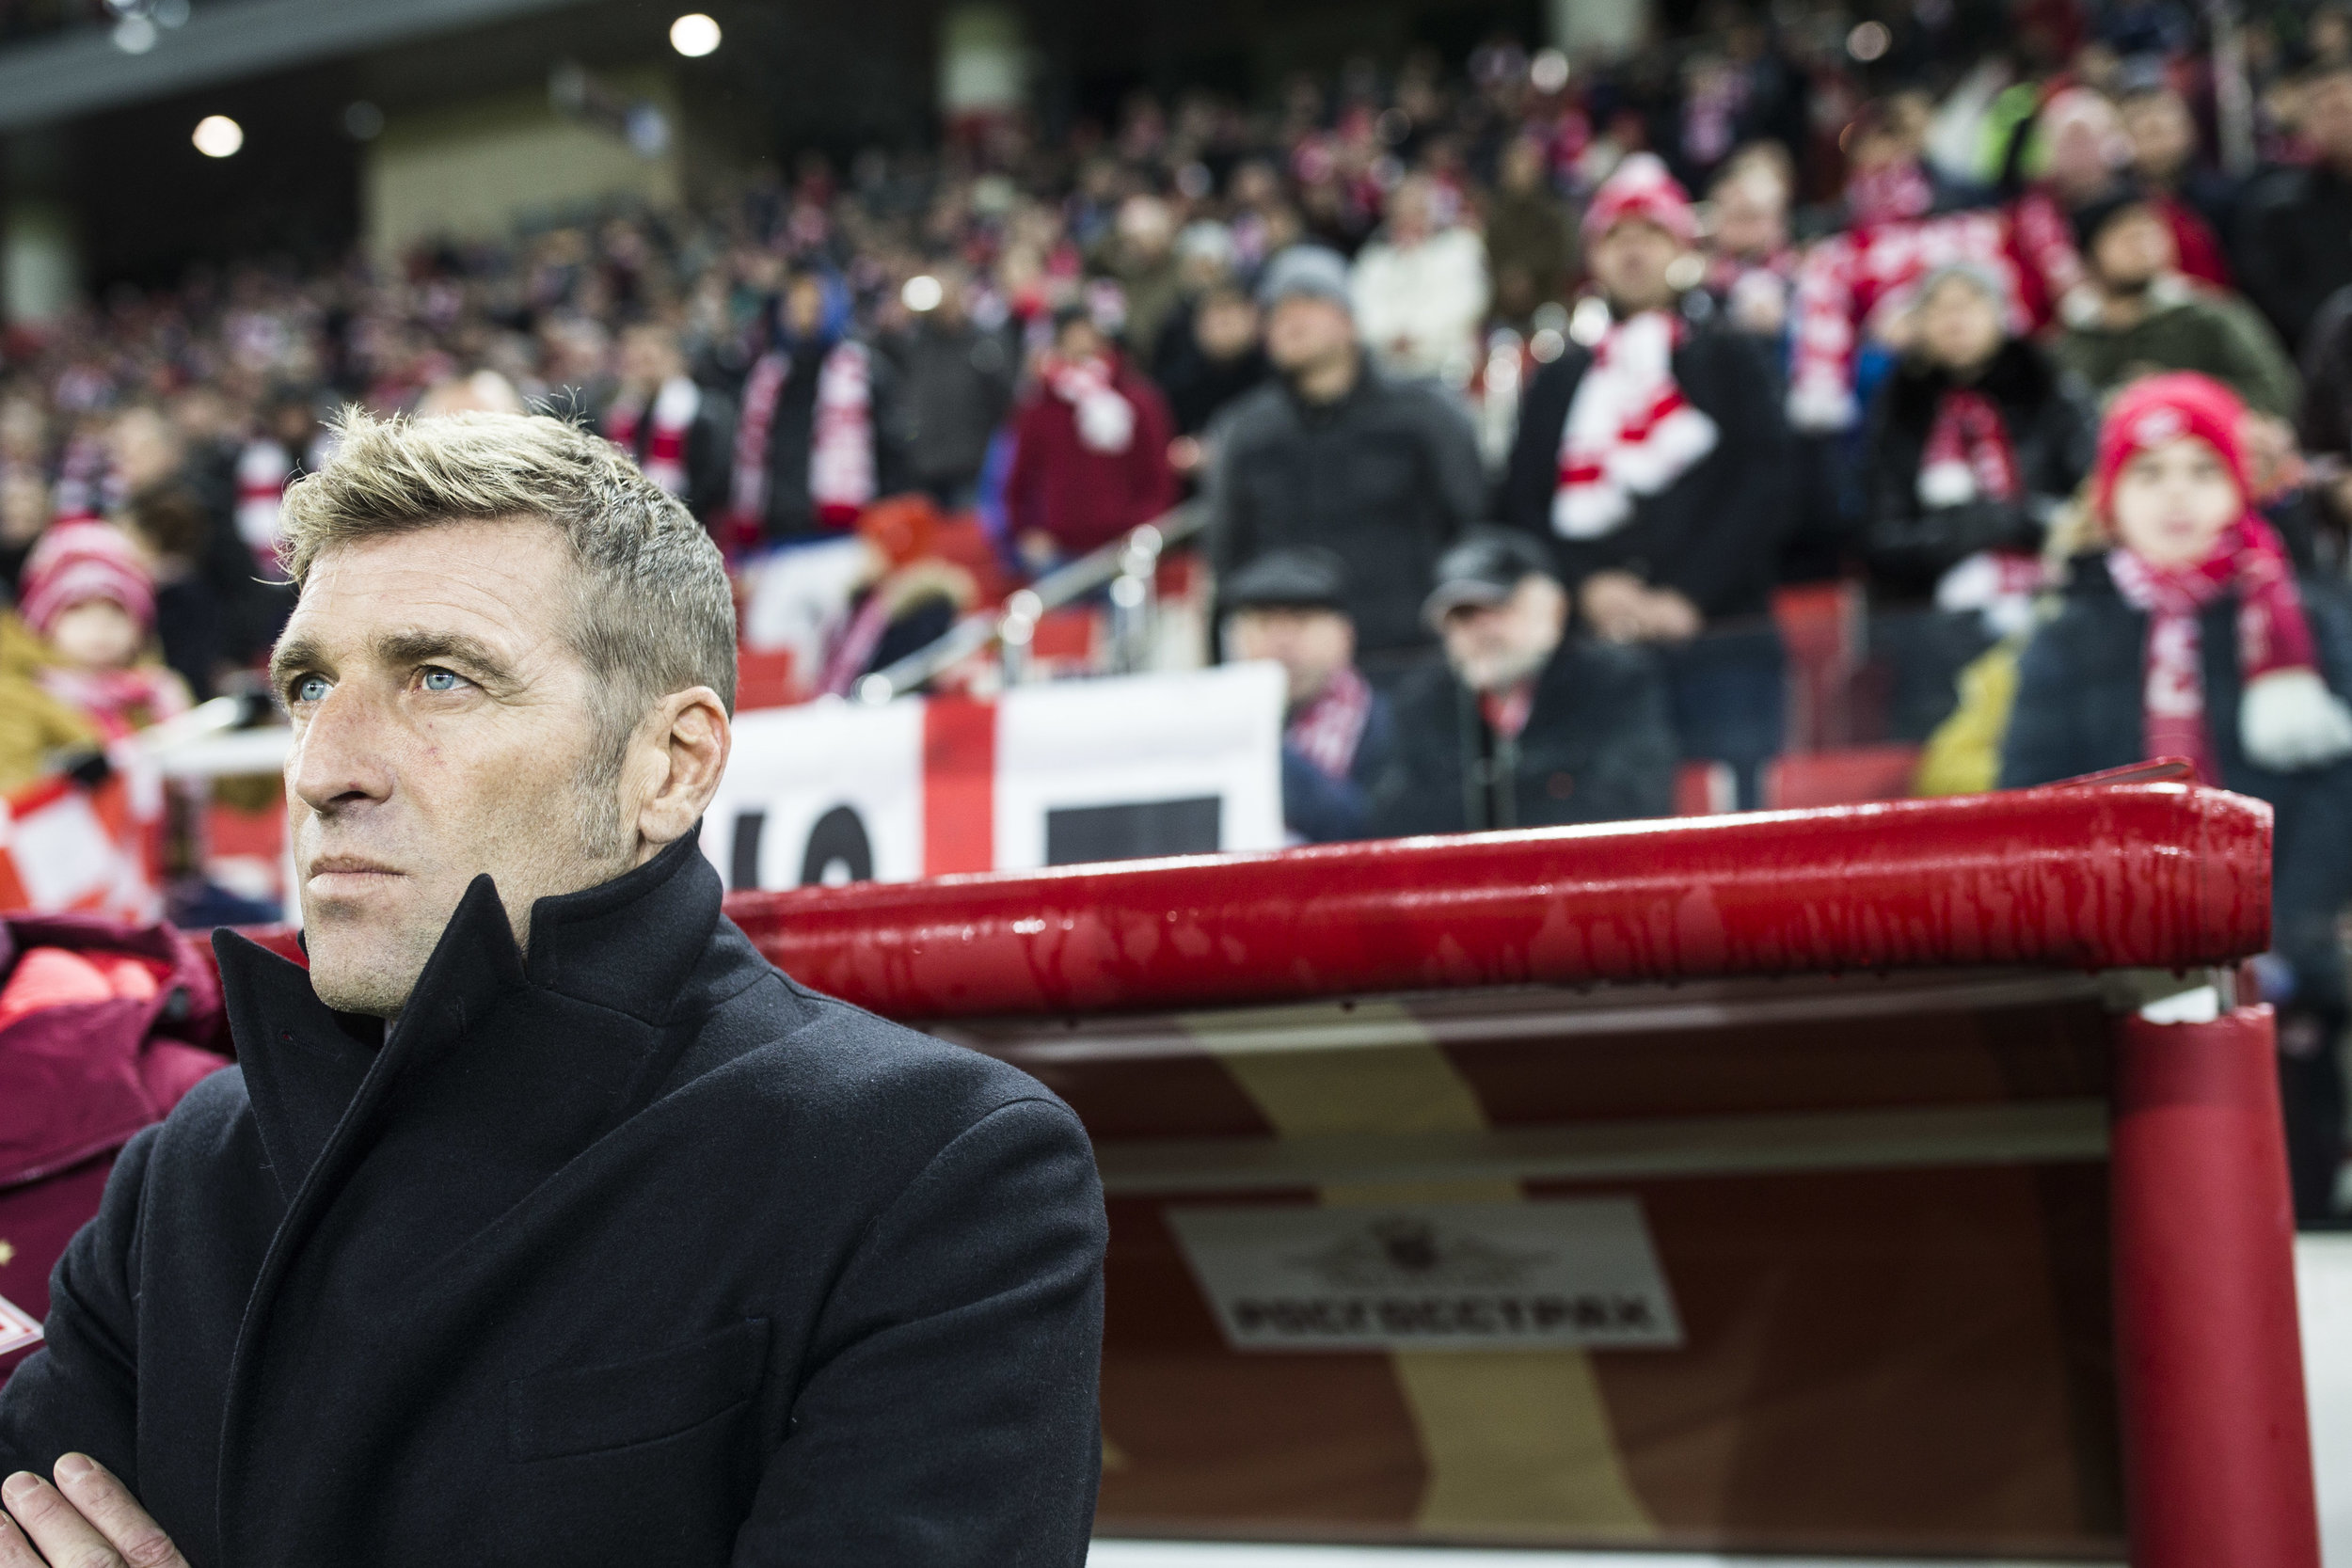  Massimo Carrera, Spartak Moscow head coach, prepares to lead his team in a Russian Premier League game against Orenburg. Carrera was initially signed to be a defense coach under Dmitry Alenichev, who was fired after a loss to AEK. He was assigned to